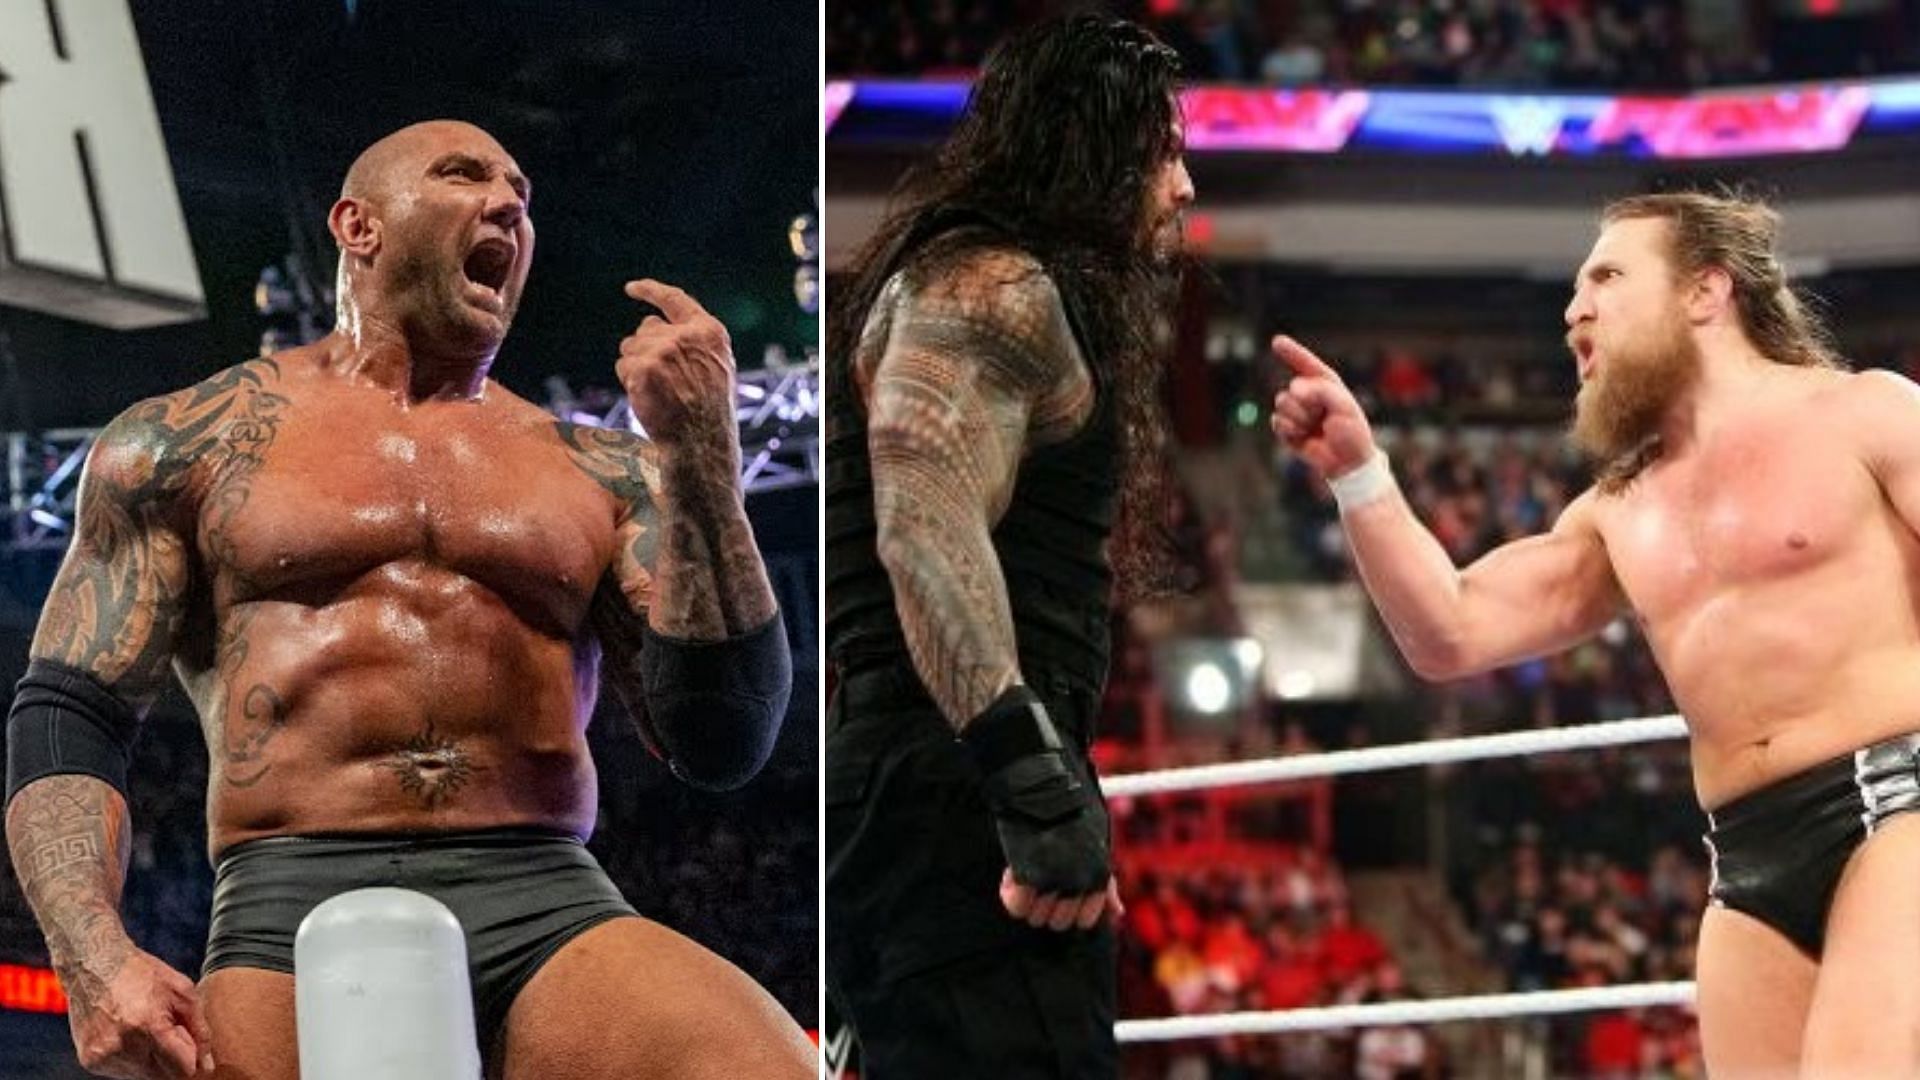 Batista won the Rumble in 2014 and Reigns in 2015; Bryan was the fan-favorite both years